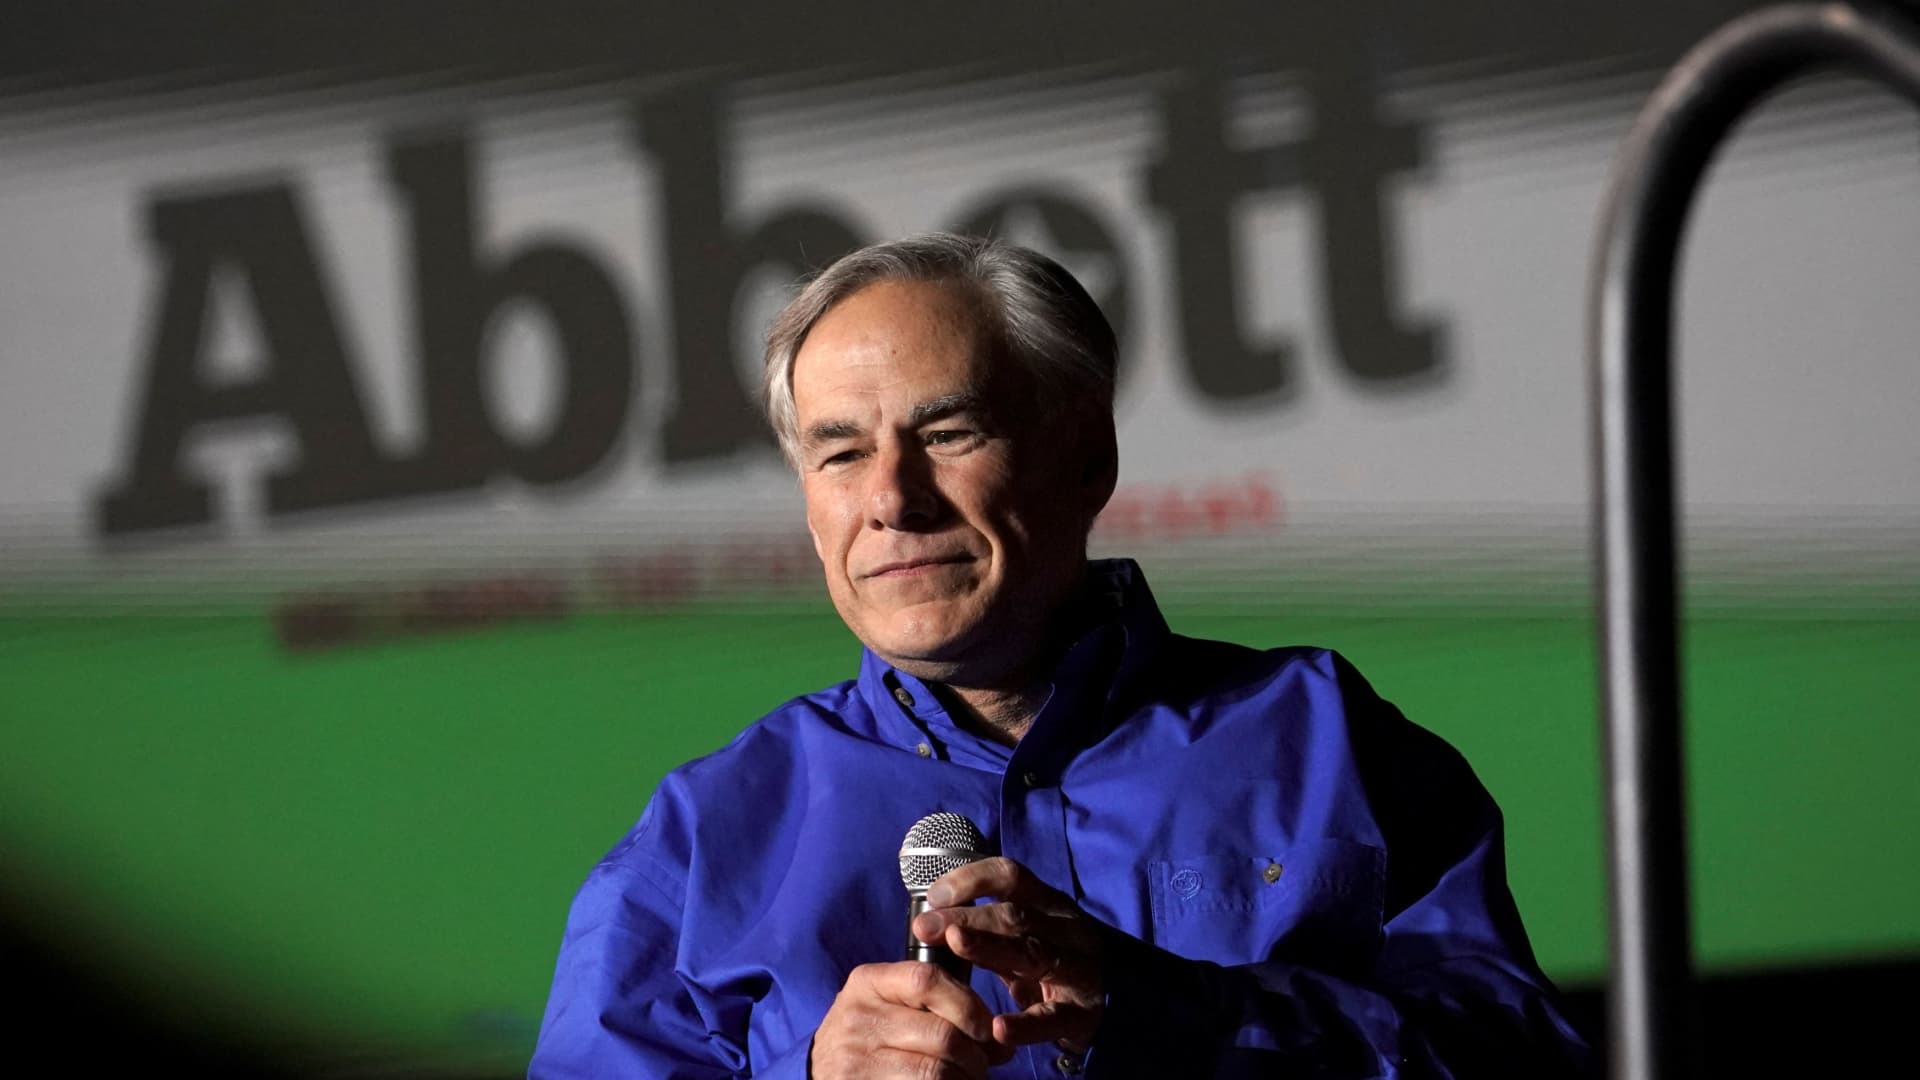 Texas Governor Greg Abbott speaks during a rally, in Conroe, Texas, U.S., January 29, 2022.